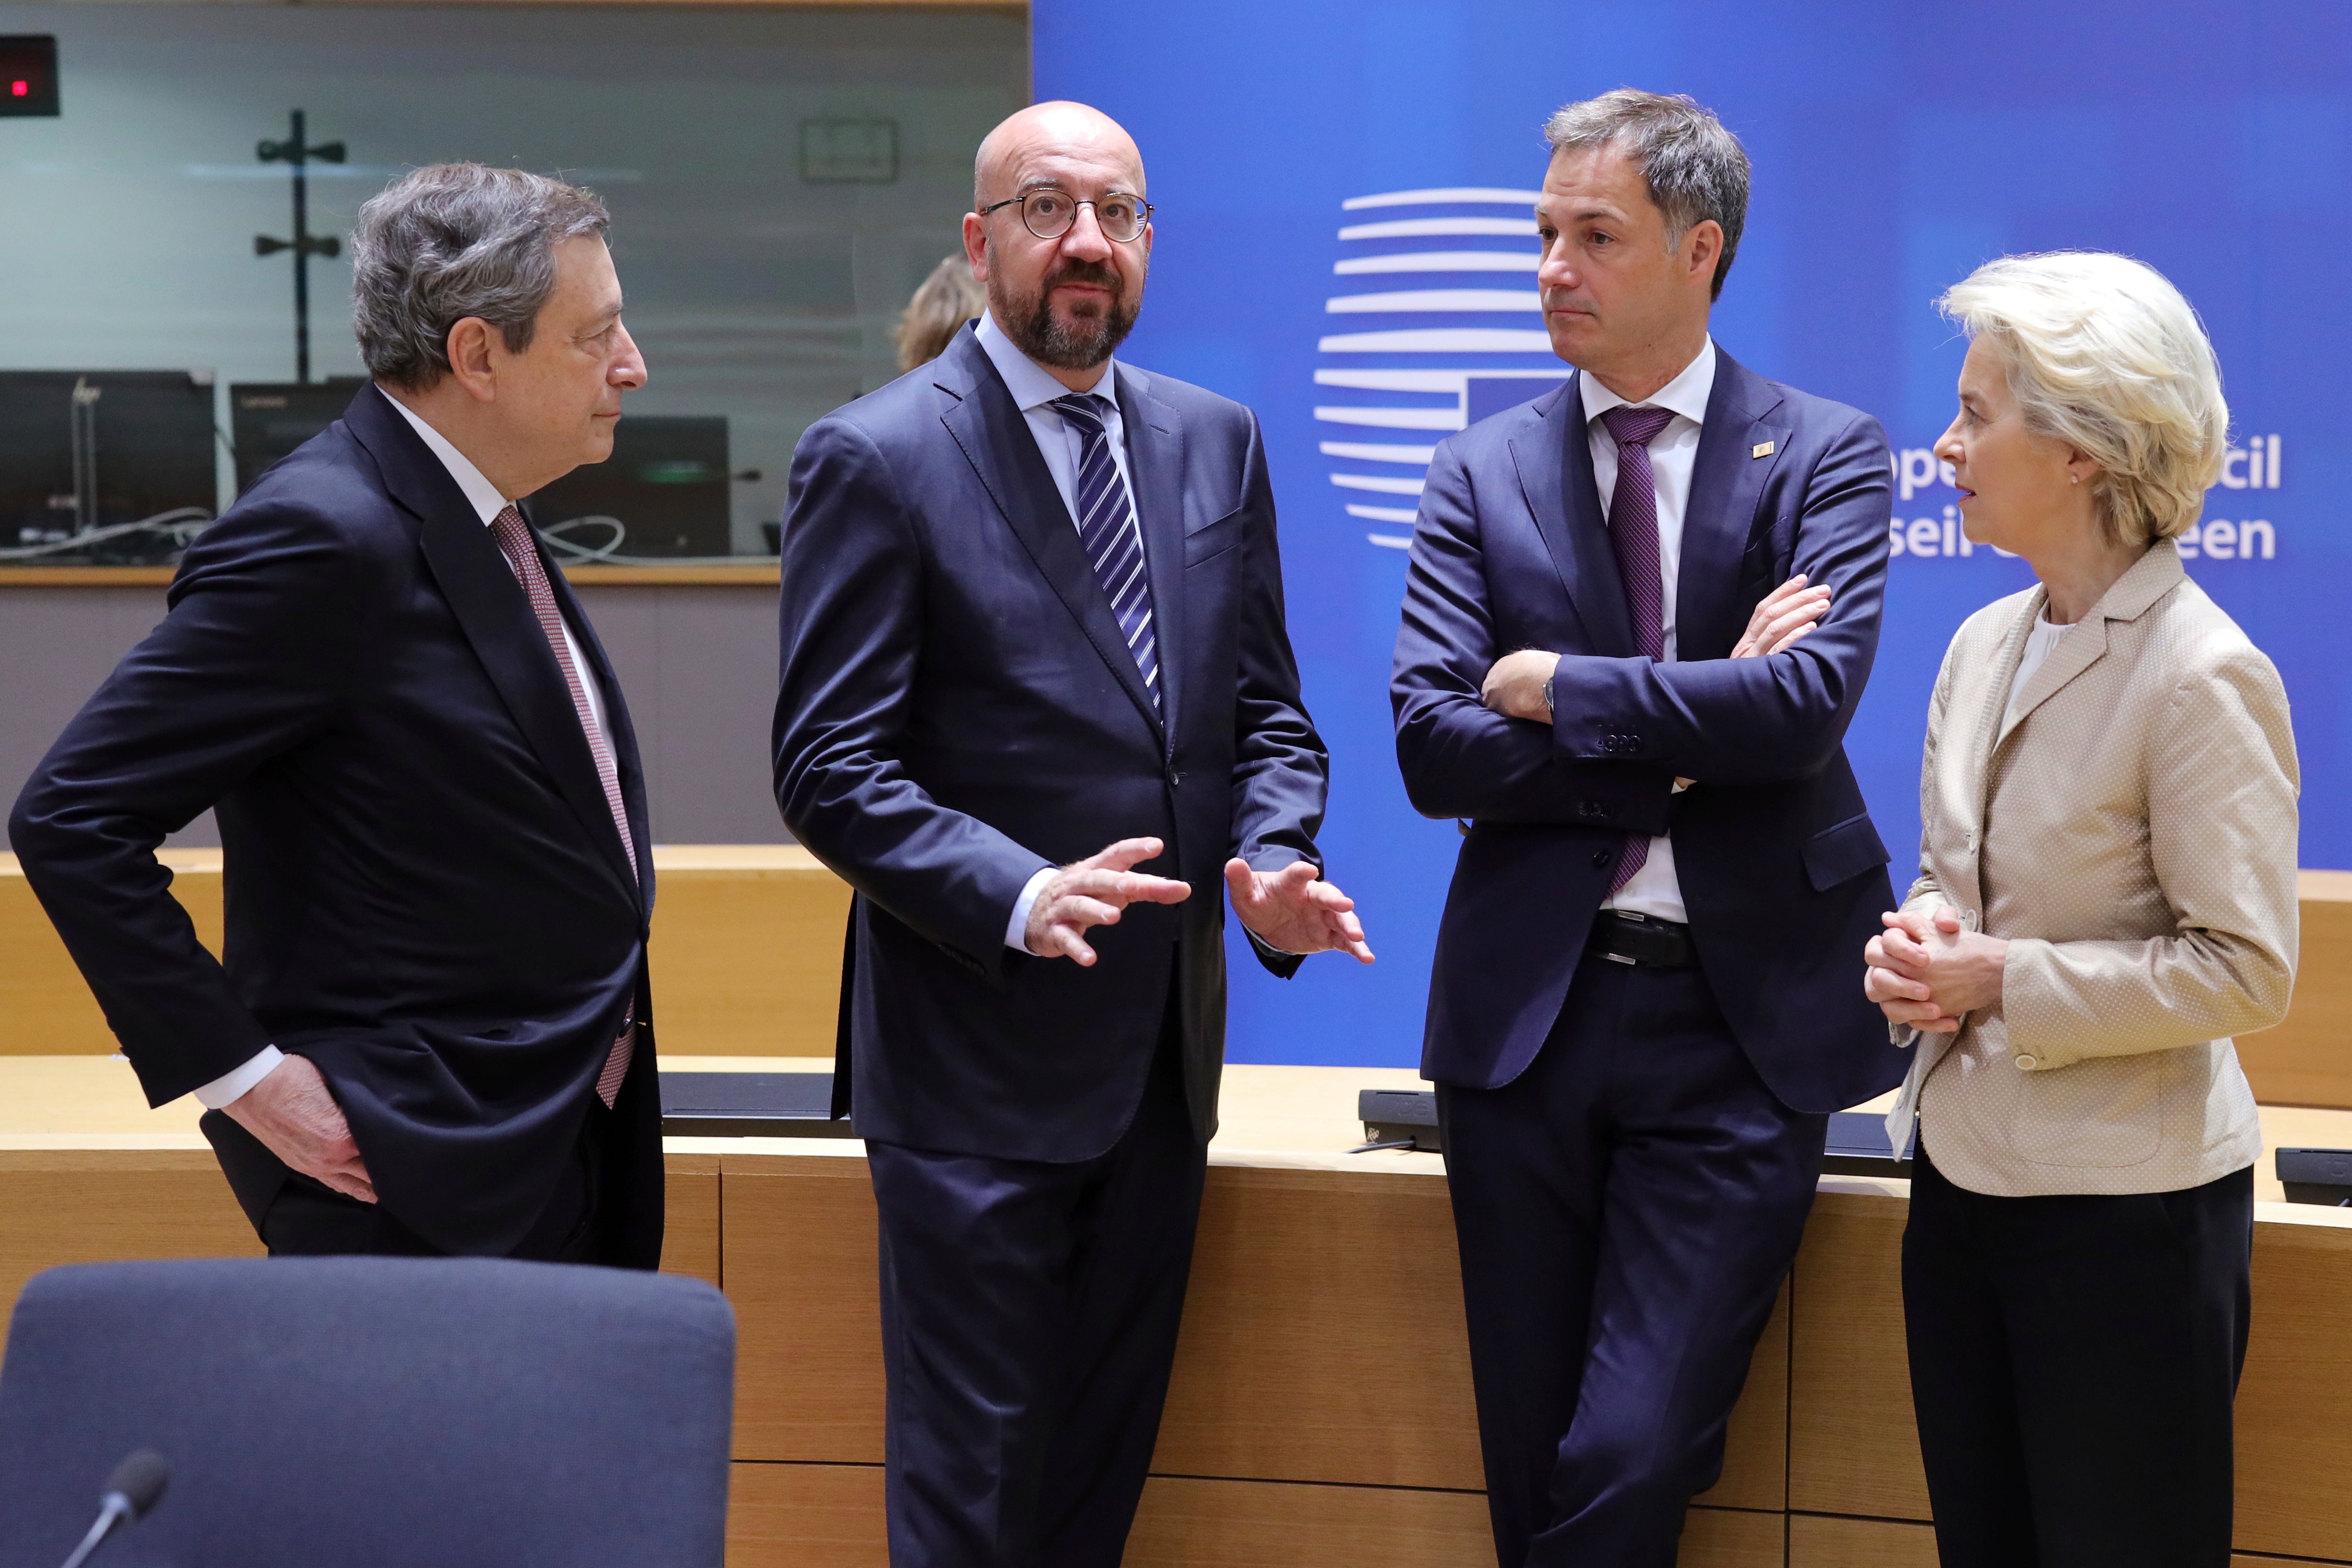 Among those in Brussels on Tuesday for the extraordinary meeting of EU leaders to discuss Ukraine, energy and food security are (from left) Italian premier Mario Draghi, European Council president Charles Michel, Belgium’s prime minister Alexander de Croo, and European Commission president Ursula von der Leyen